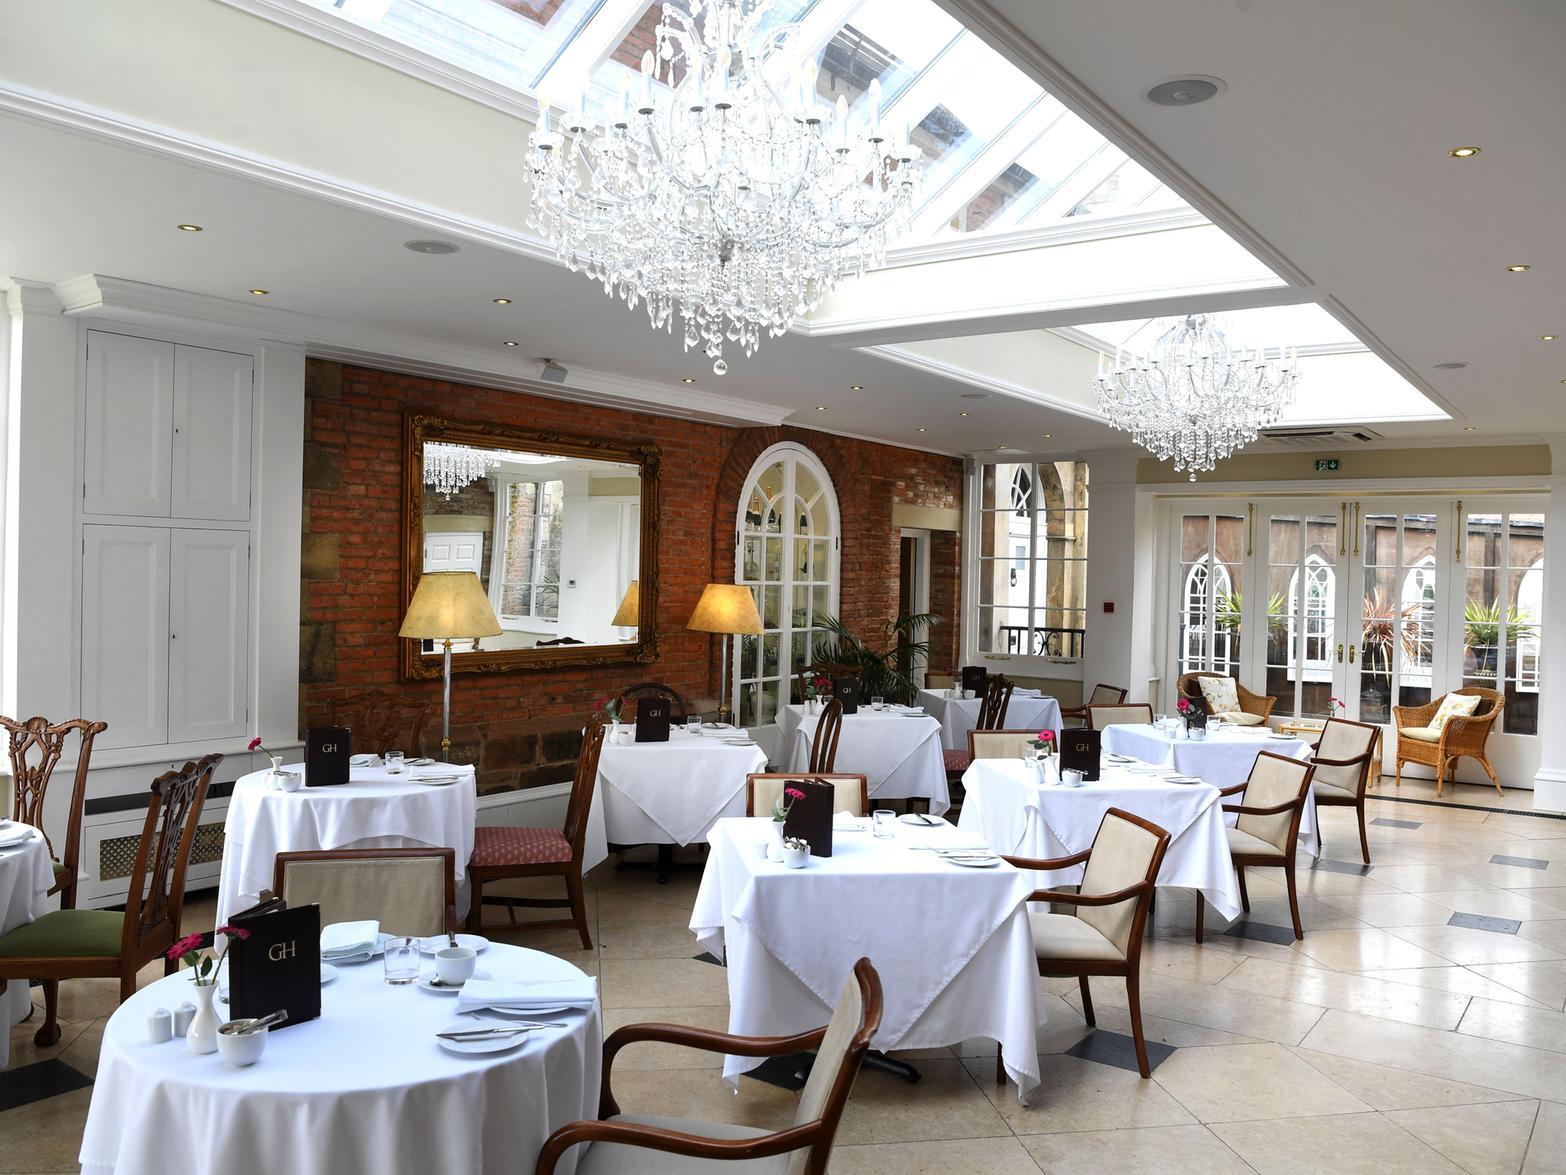 Here are the Harrogate eateries which have made it into the Restaurant